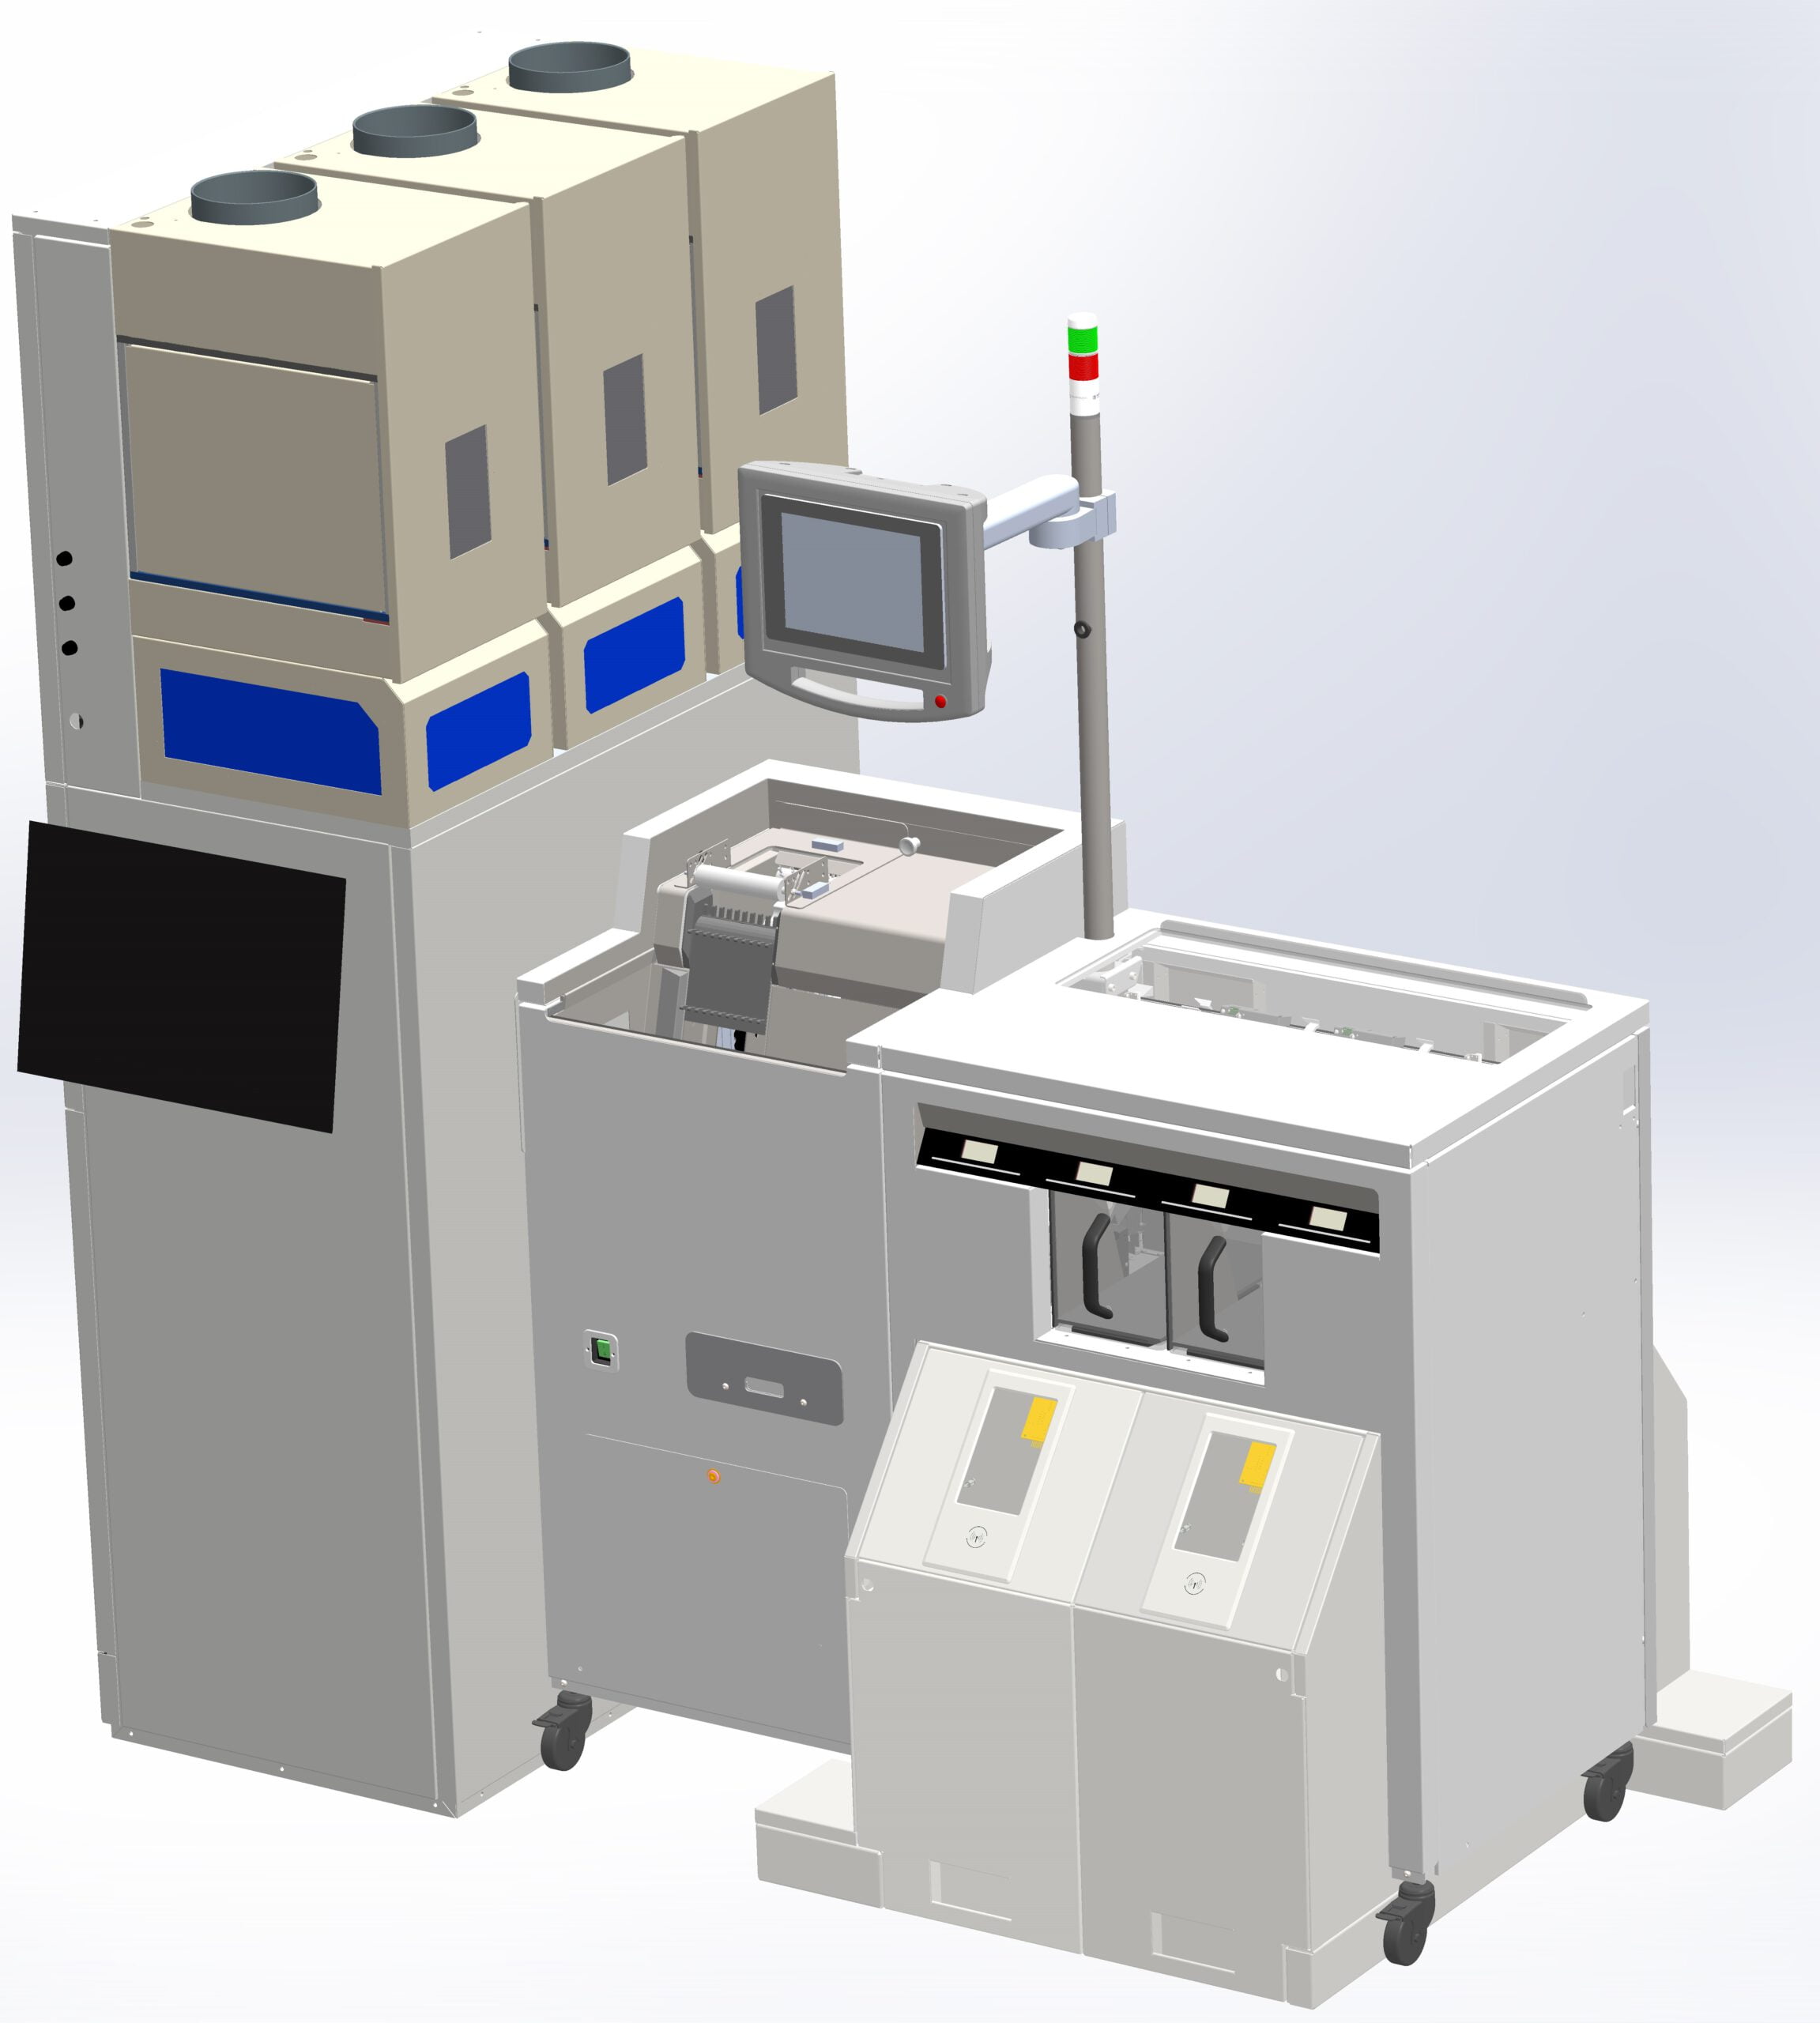 Systems connected to automatize sample reception, registration, separation (sorting) and further distribution within the laboratory